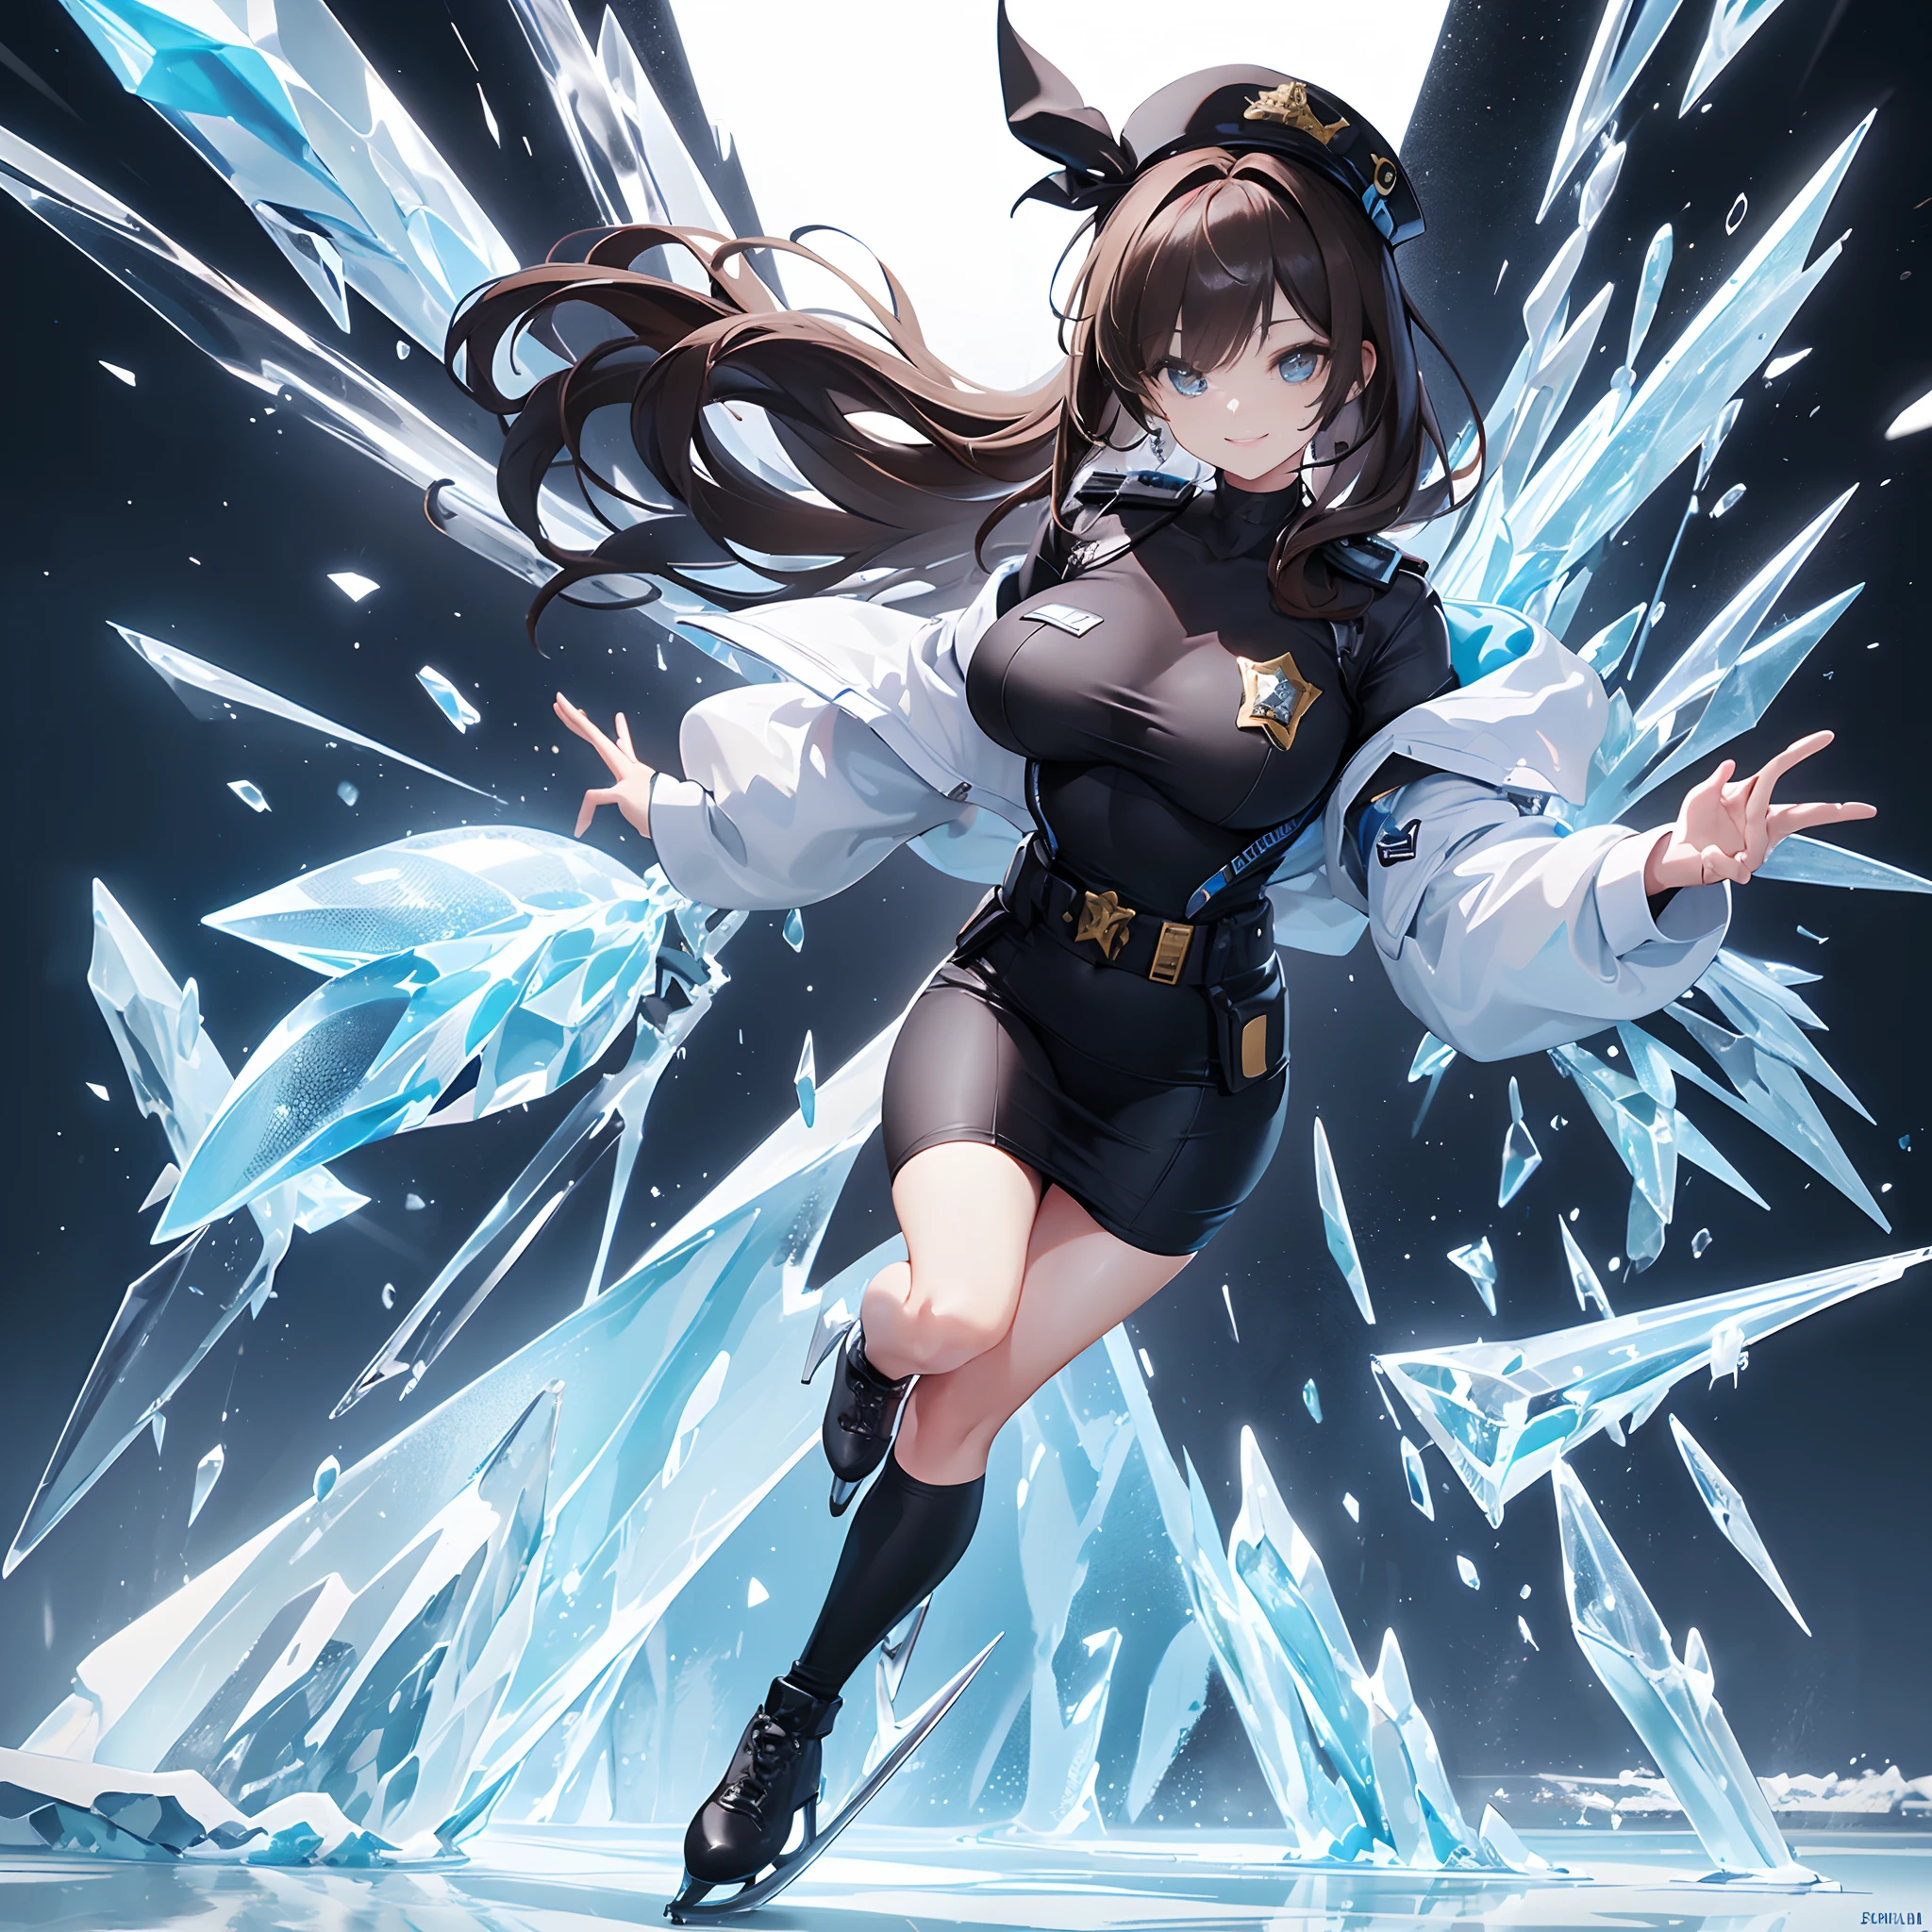 ((((fullllbody,Ice skater in police clothes, sensual smiling, 1 persons)))No background, One Young Woman, police officers,Ice-based weapons,Brown hair, eye reflections, Open Makeup, high detailing, Gothic art, Ray tracing reflected light, masutepiece,  Super Detail, high detailing, High quality, Better Quality, Luxury, Reflected Light, multi view, Perspective, ultra wide-angle,